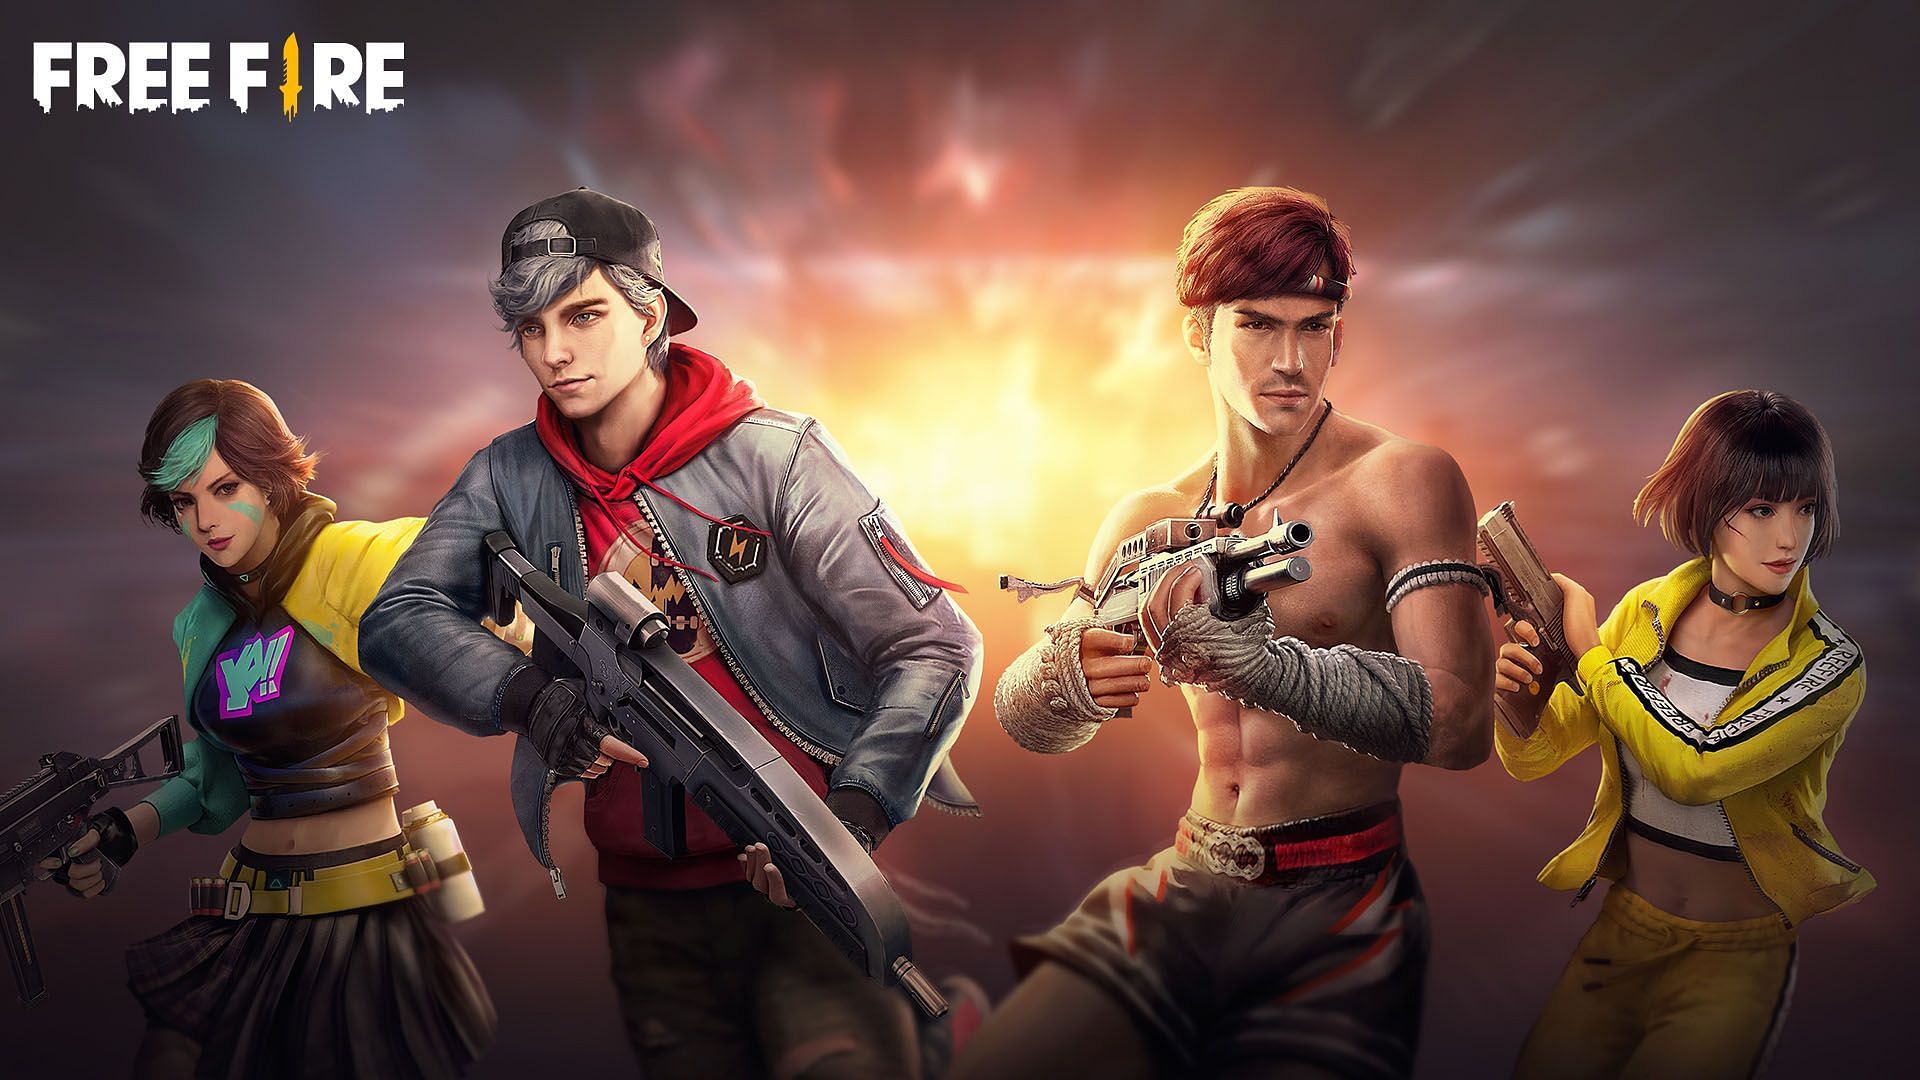 Follow these tips to make rank push easy in Free Fire (Image via Garena Free Fire)